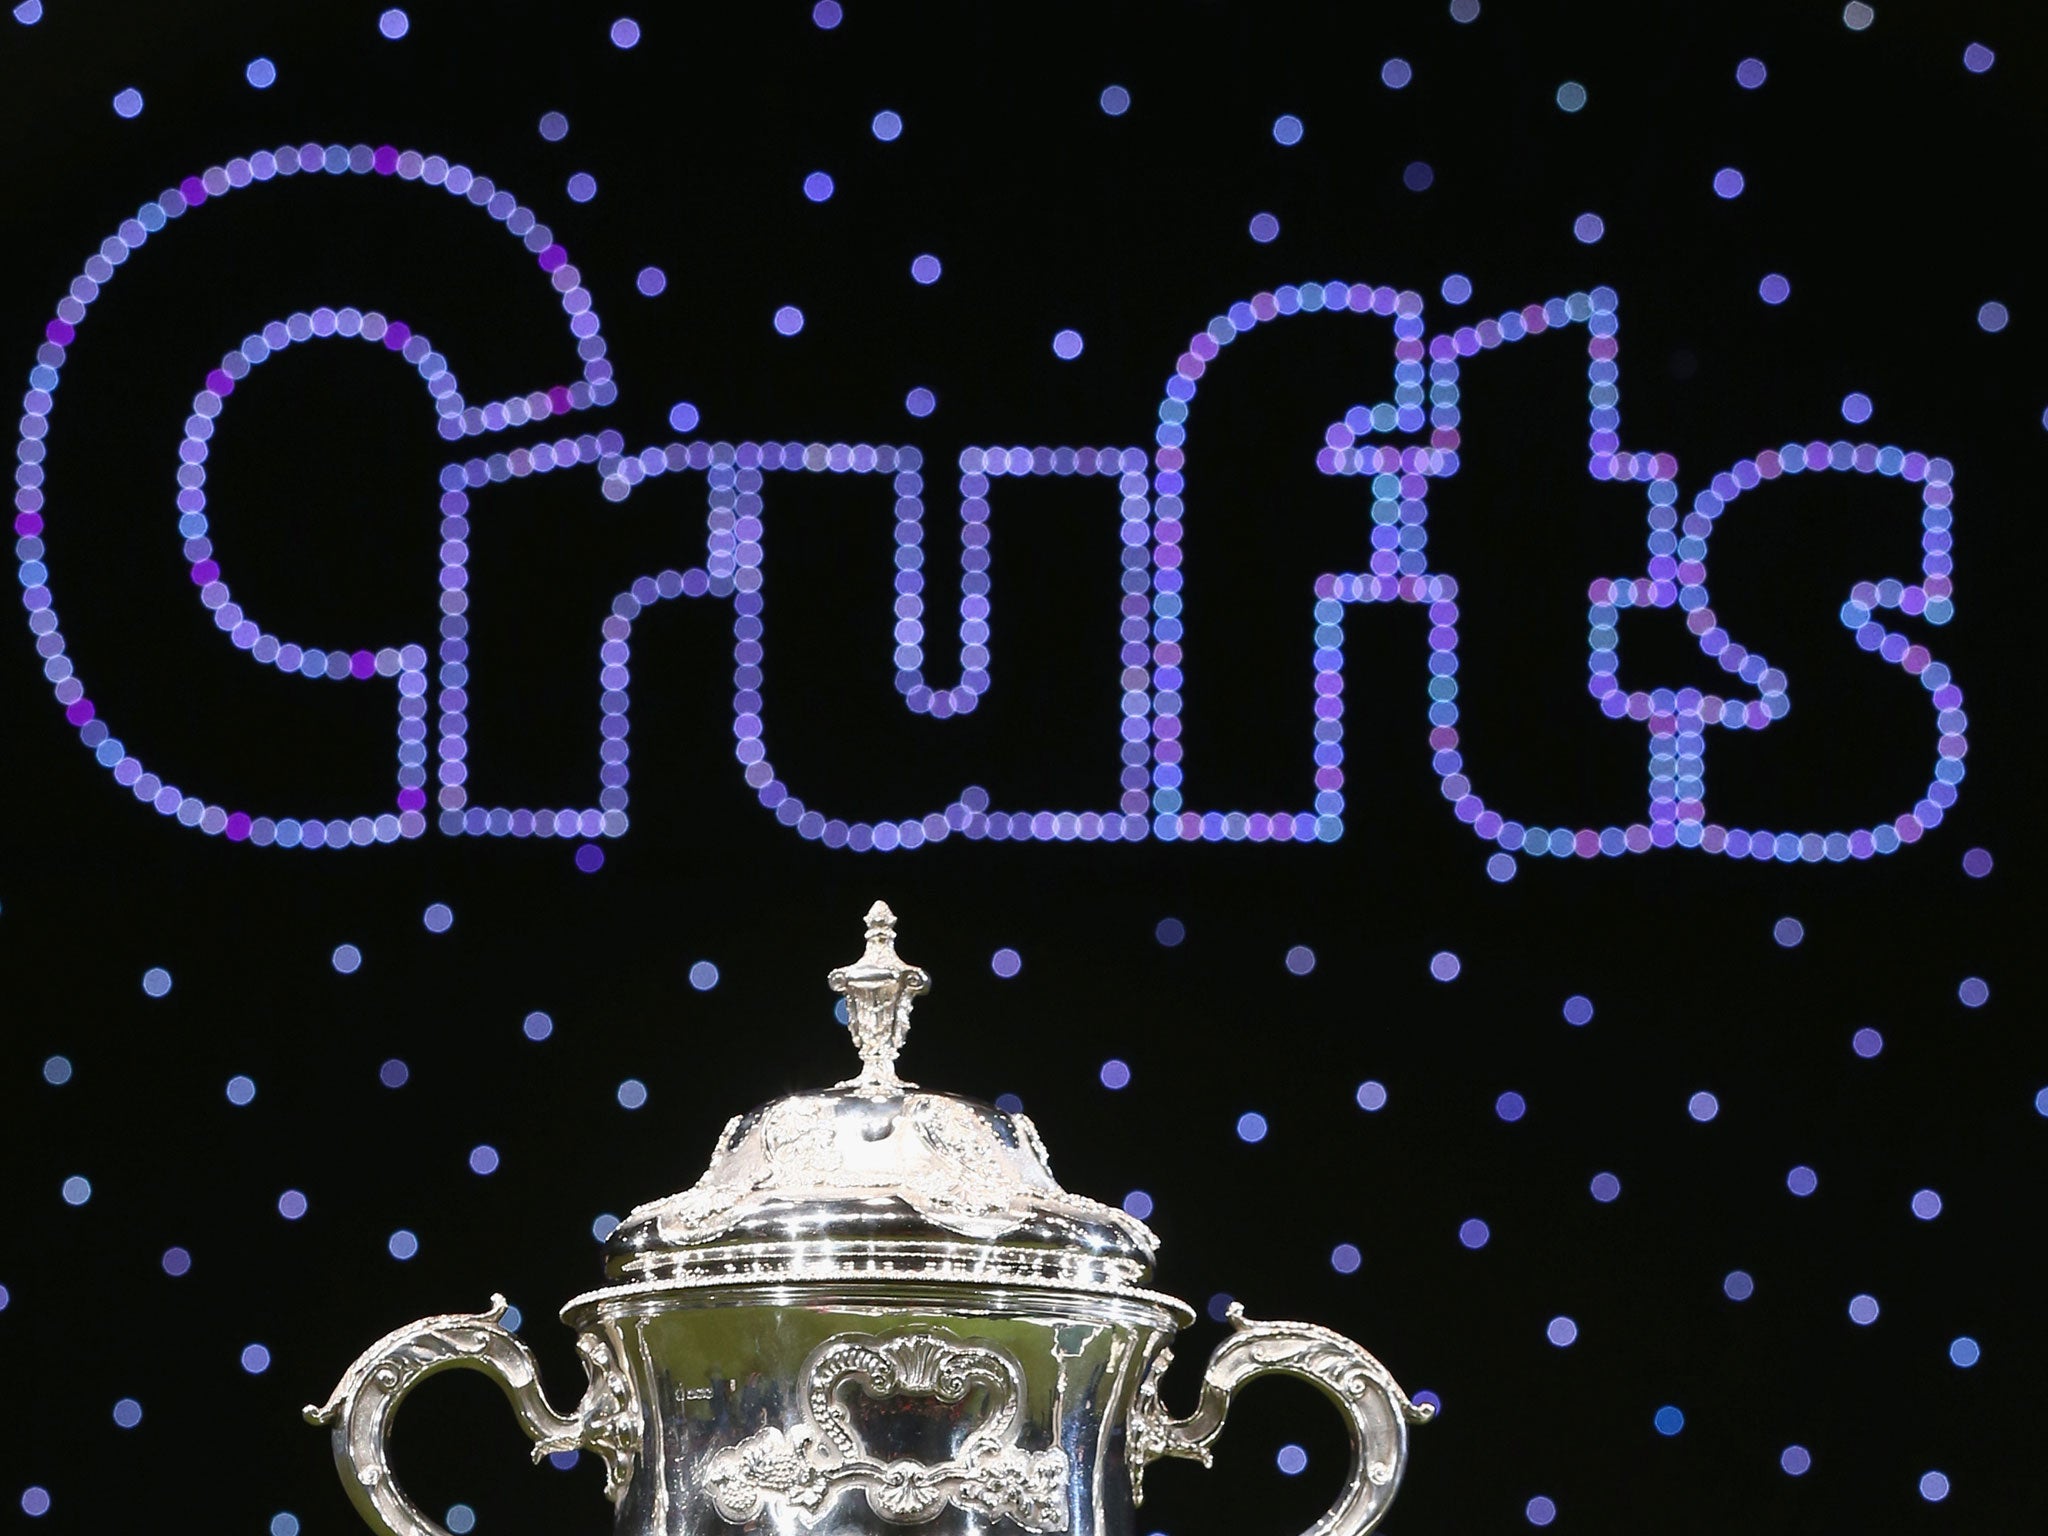 A study has concluded that one in four dogs competing in Crufts is overweight